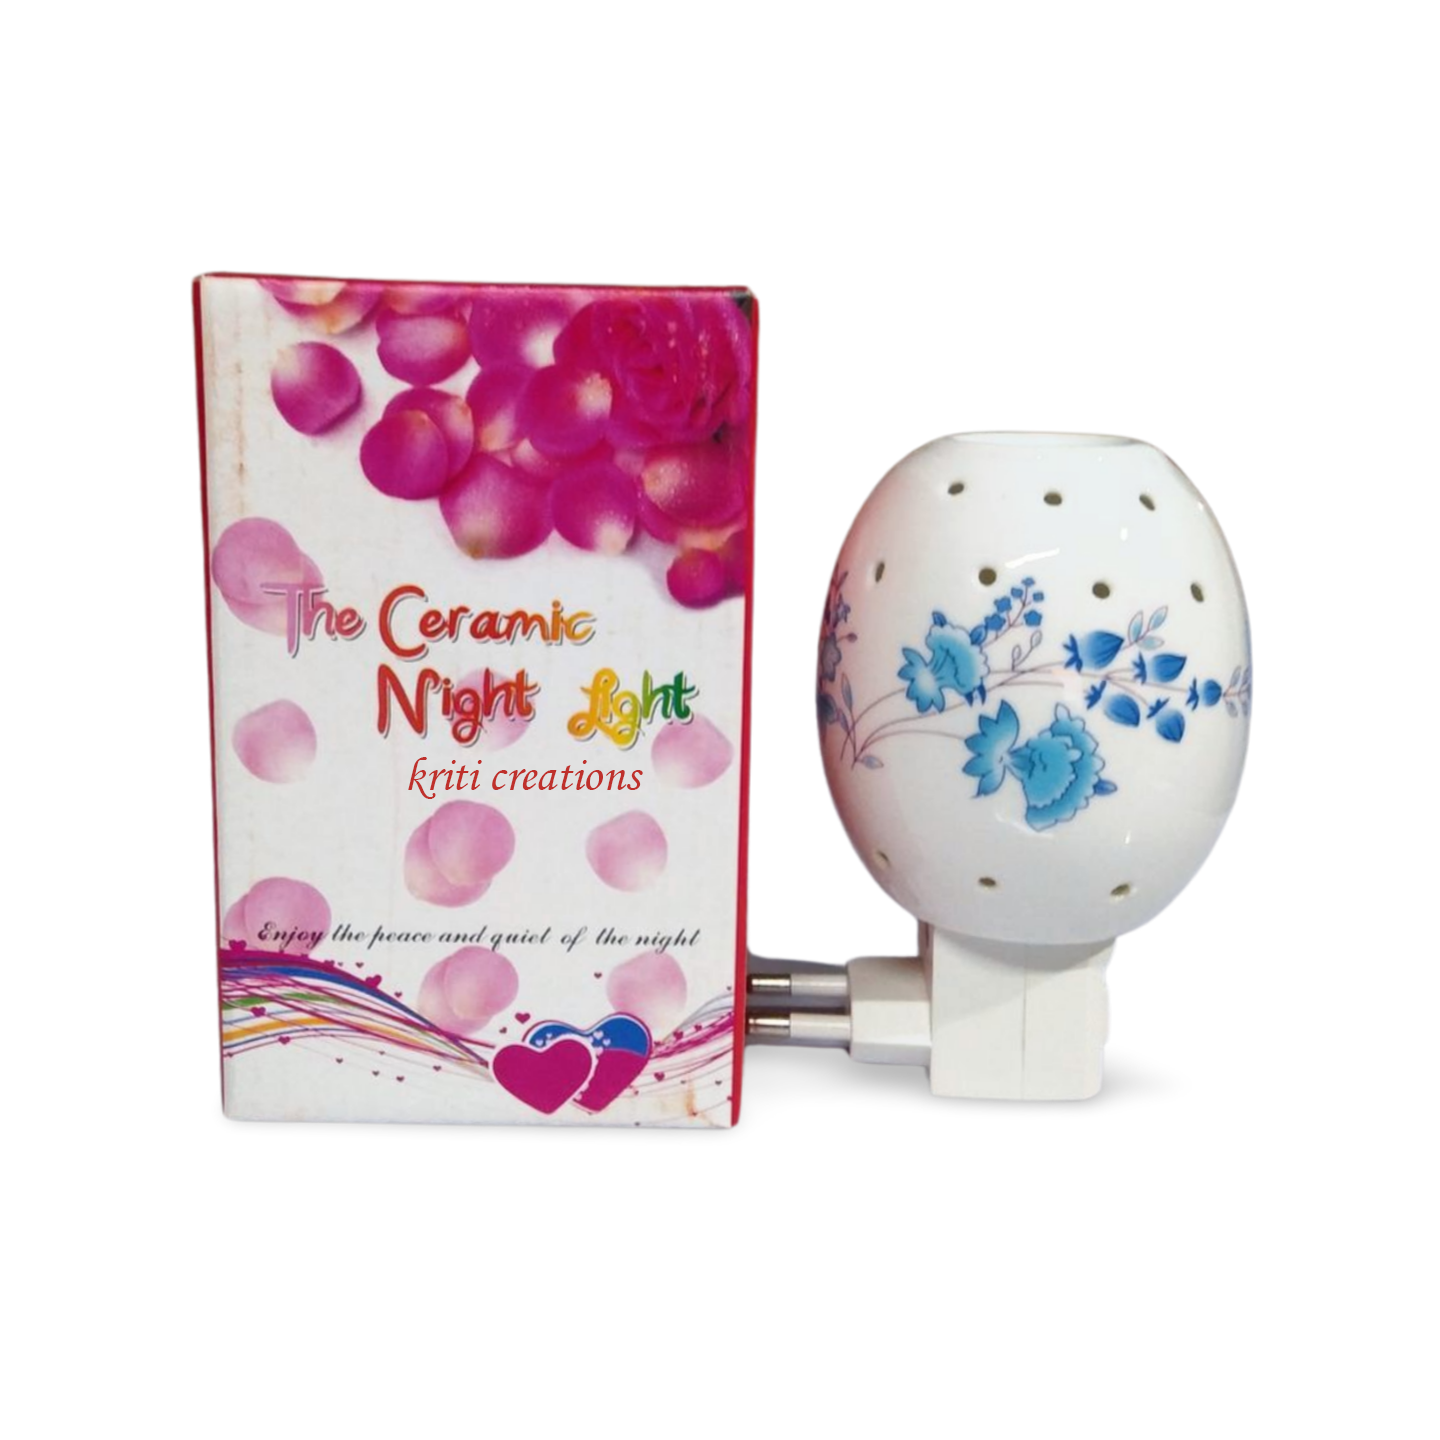 Kriti creations Beautiful Direct Plug-in/Aroma Diffuser Cum Night Lamp with Light Essential Oil Diffuser Made in India Electrical Diffuser